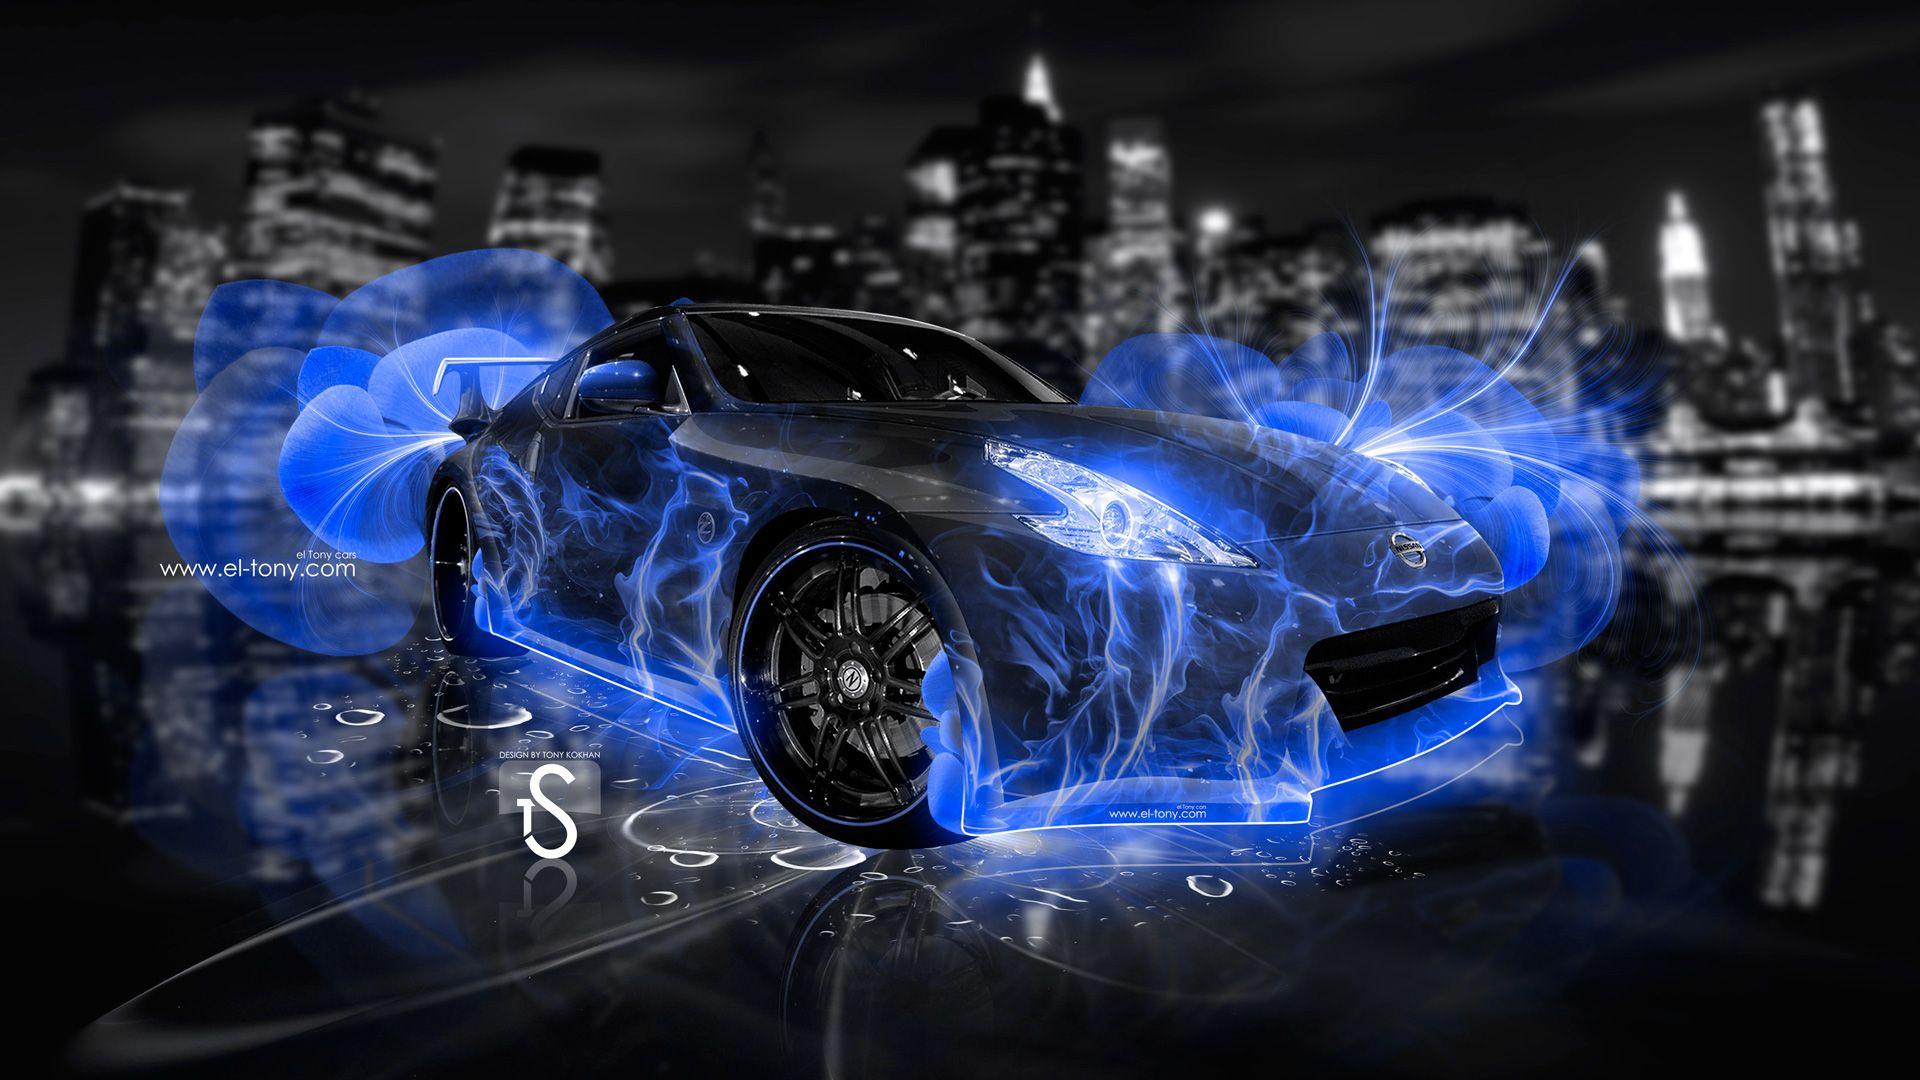 Neon Blue Car Wallpapers - Top Free Neon Blue Car Backgrounds ...